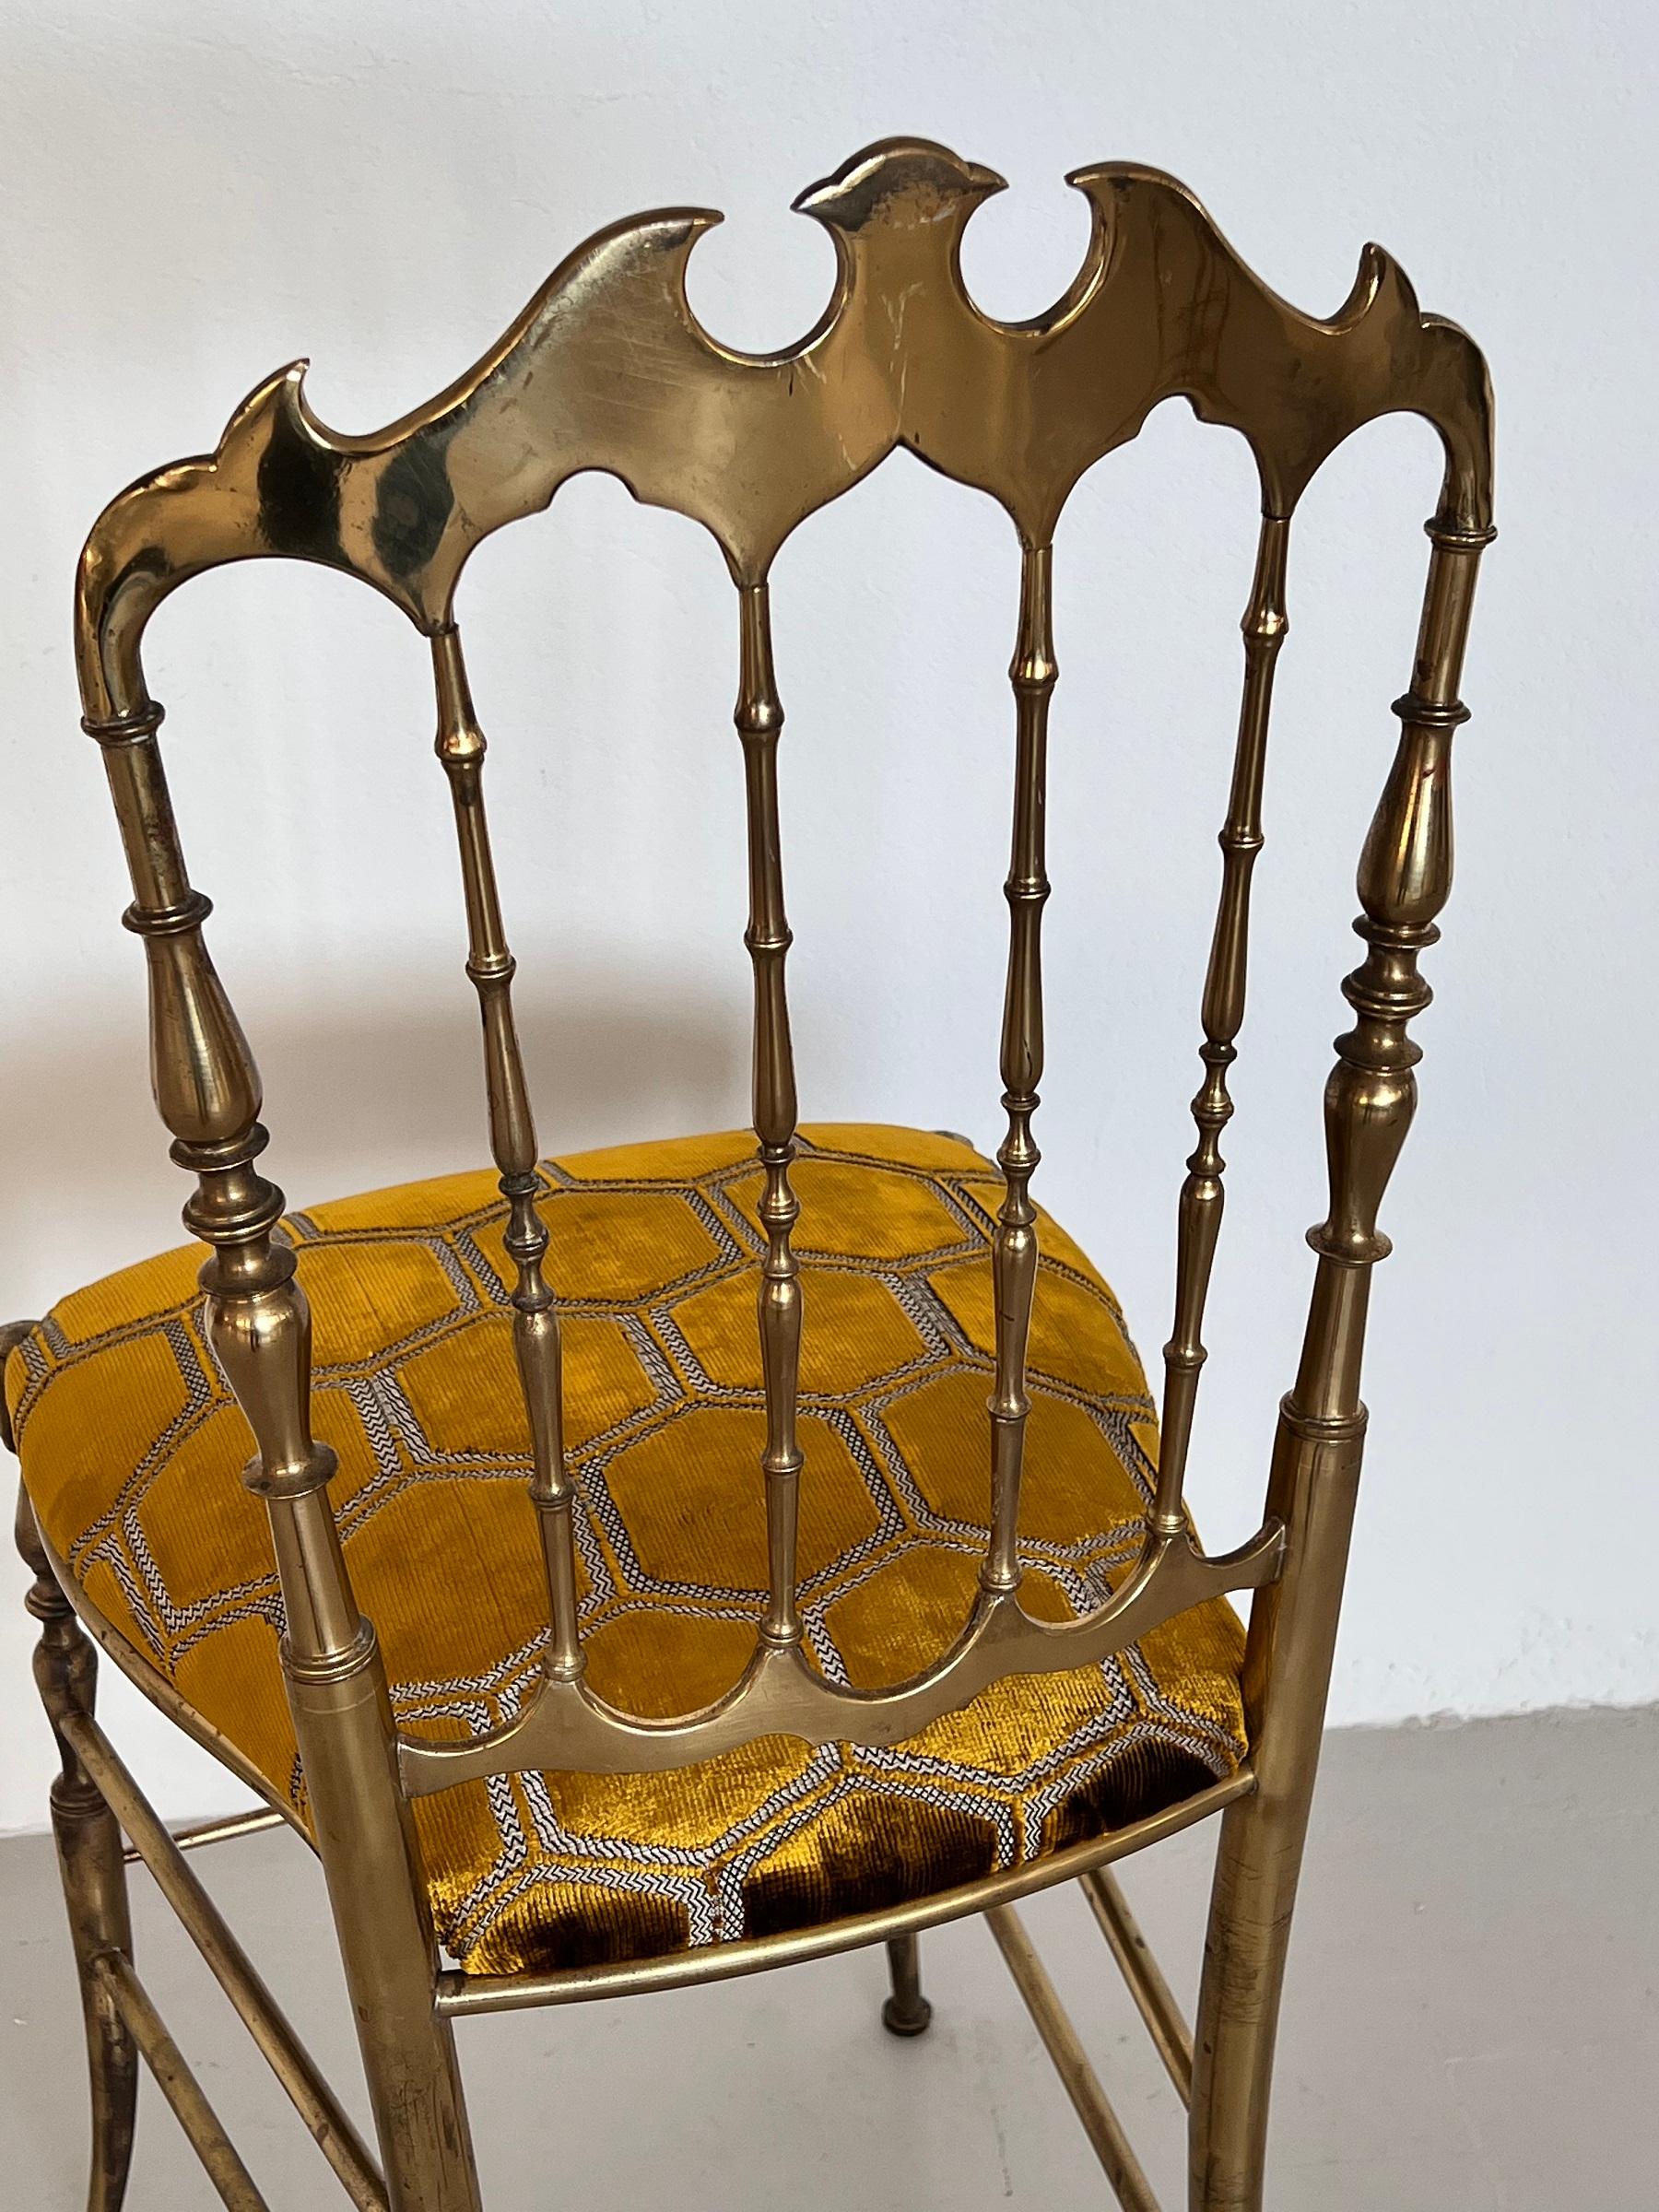 Italian Mid-Century Chiavari Chair in Full Brass with New Upholstery, 1970s For Sale 2